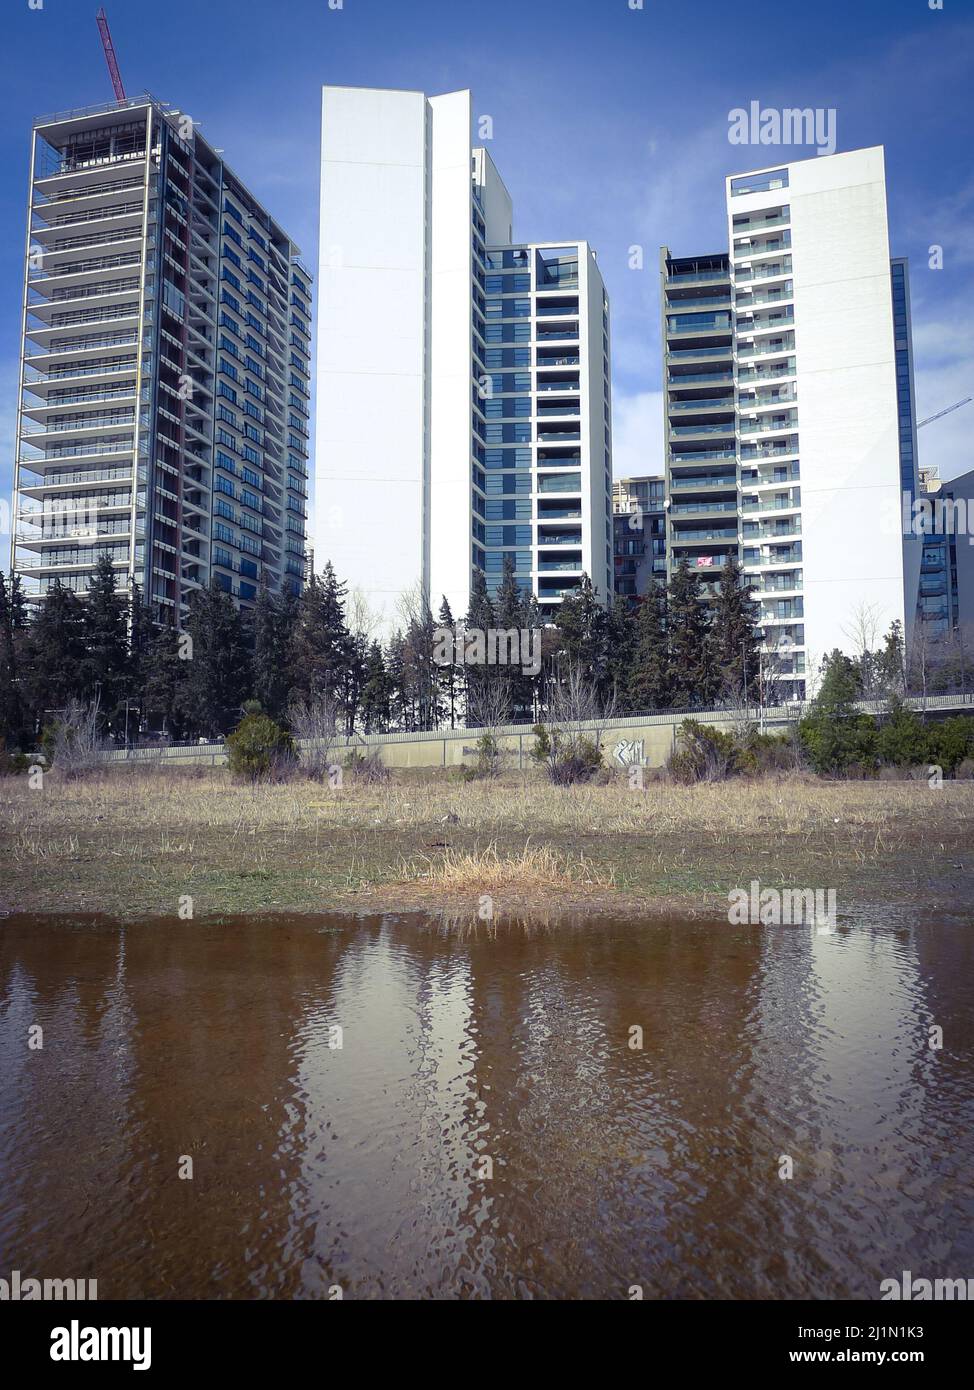 Modern multistory buildings reflected in water. Puddle with reflections. Stock Photo